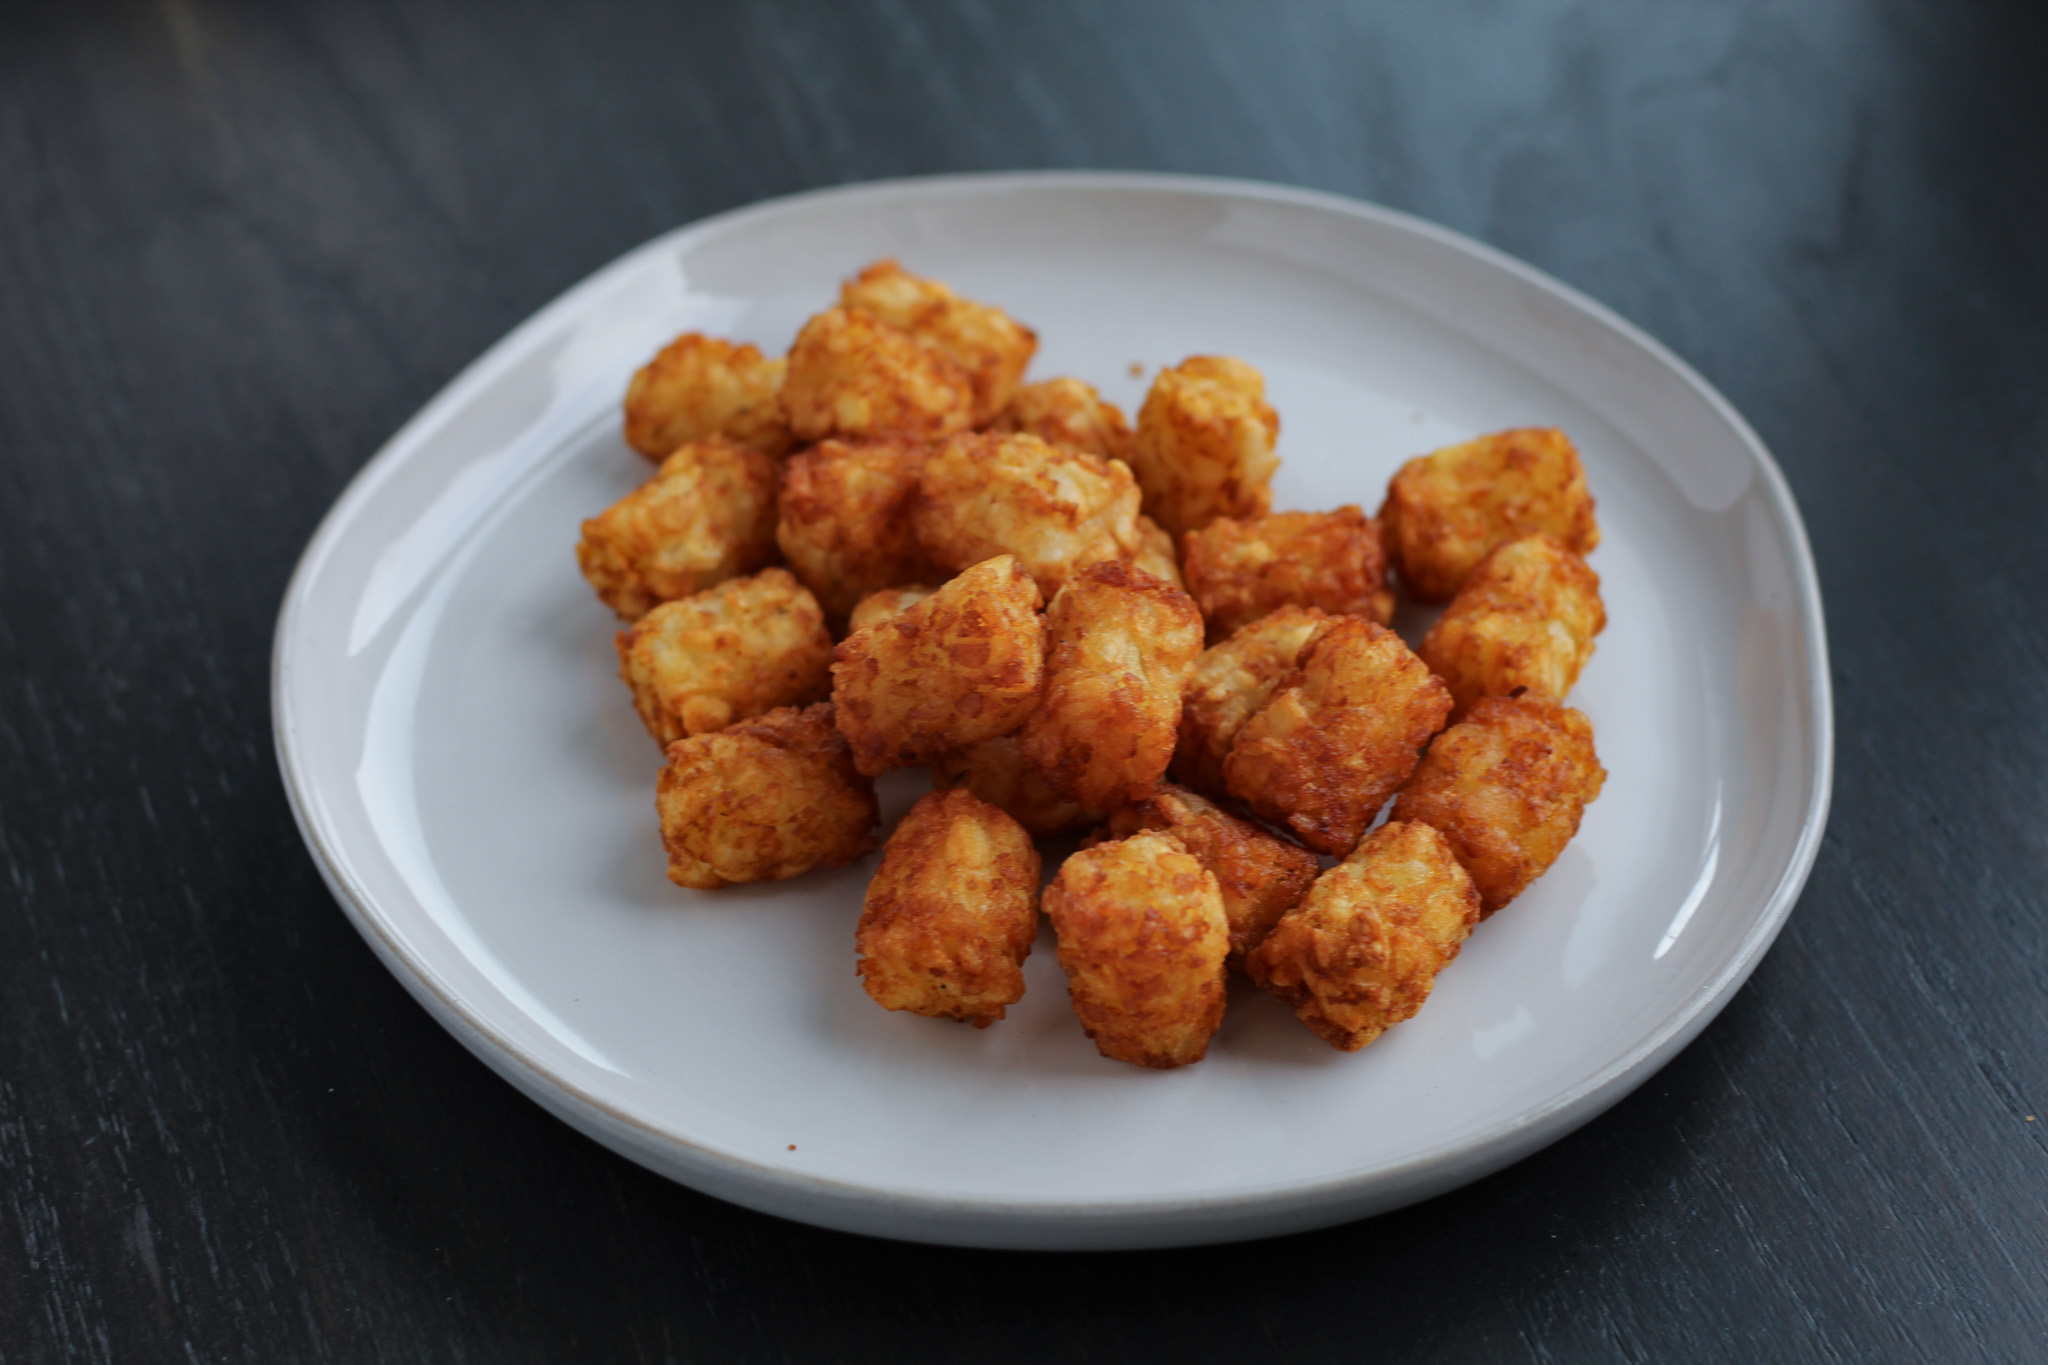 frozen tater tots on a plate after being cooked in an air fryer